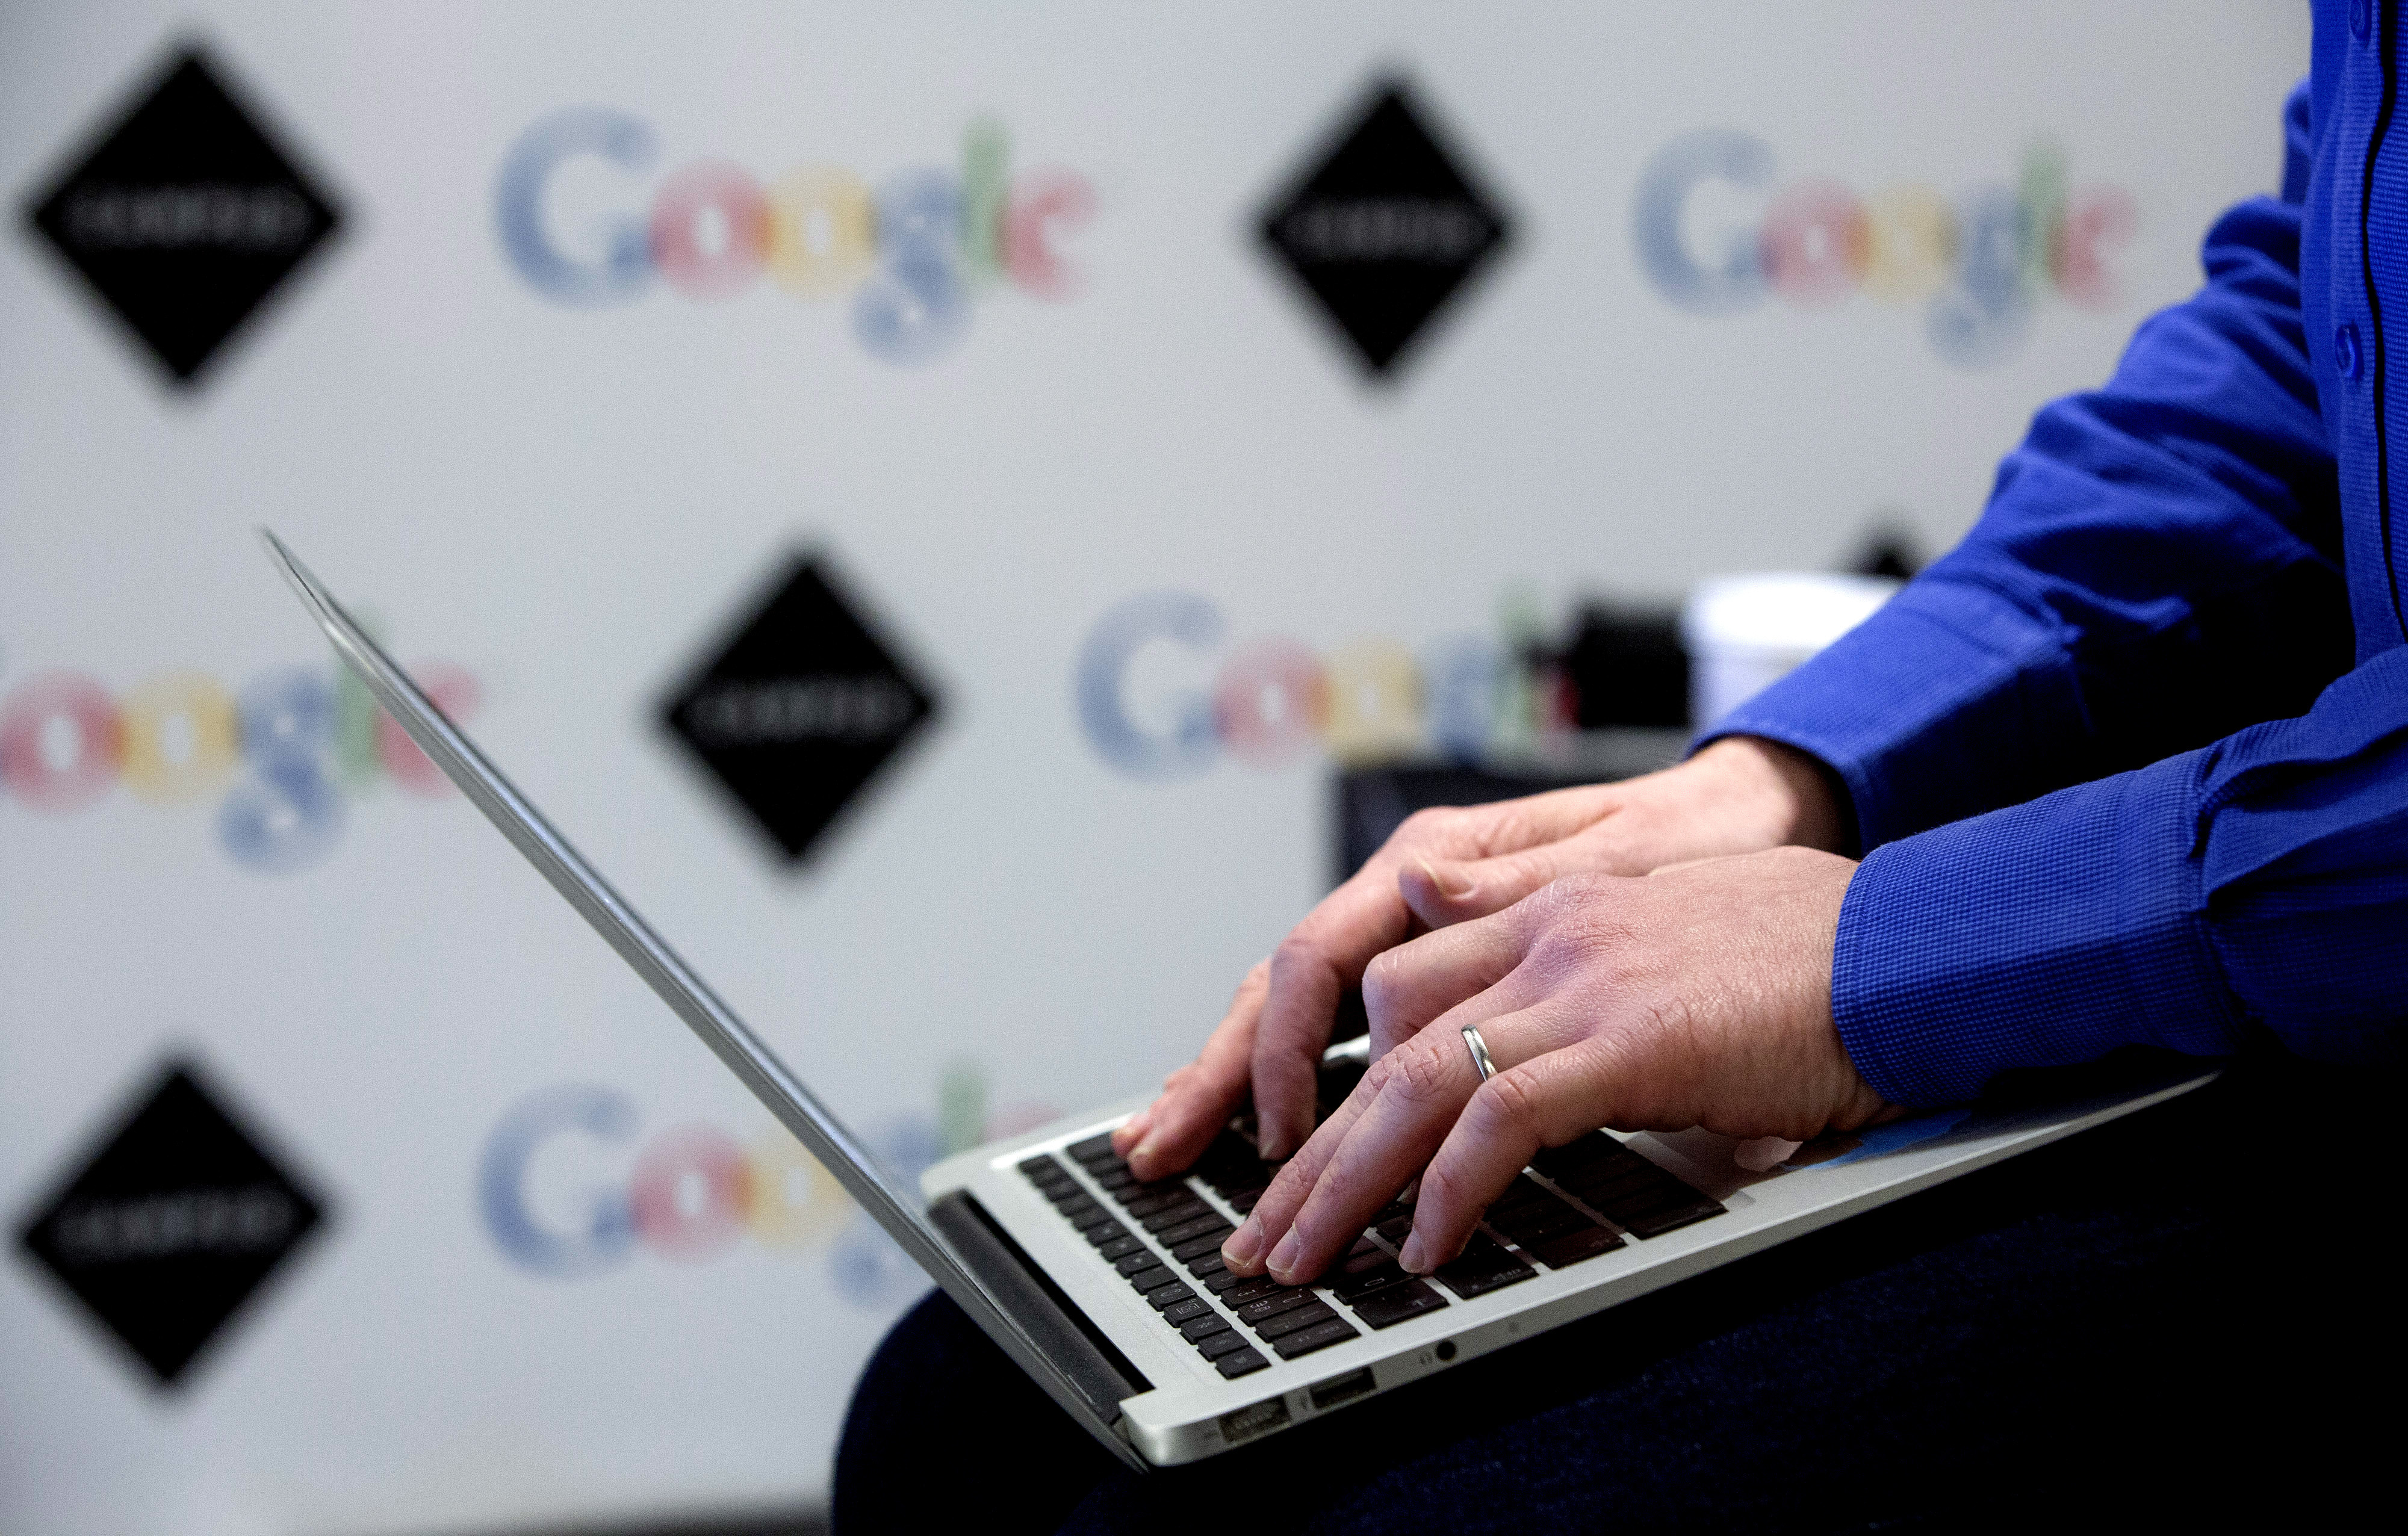 A visitor uses a laptop computer at Google Inc.'s London Campus, in London, U.K., on Monday, Dec. 2, 2013. (Bloomberg&mdash;Bloomberg via Getty Images)